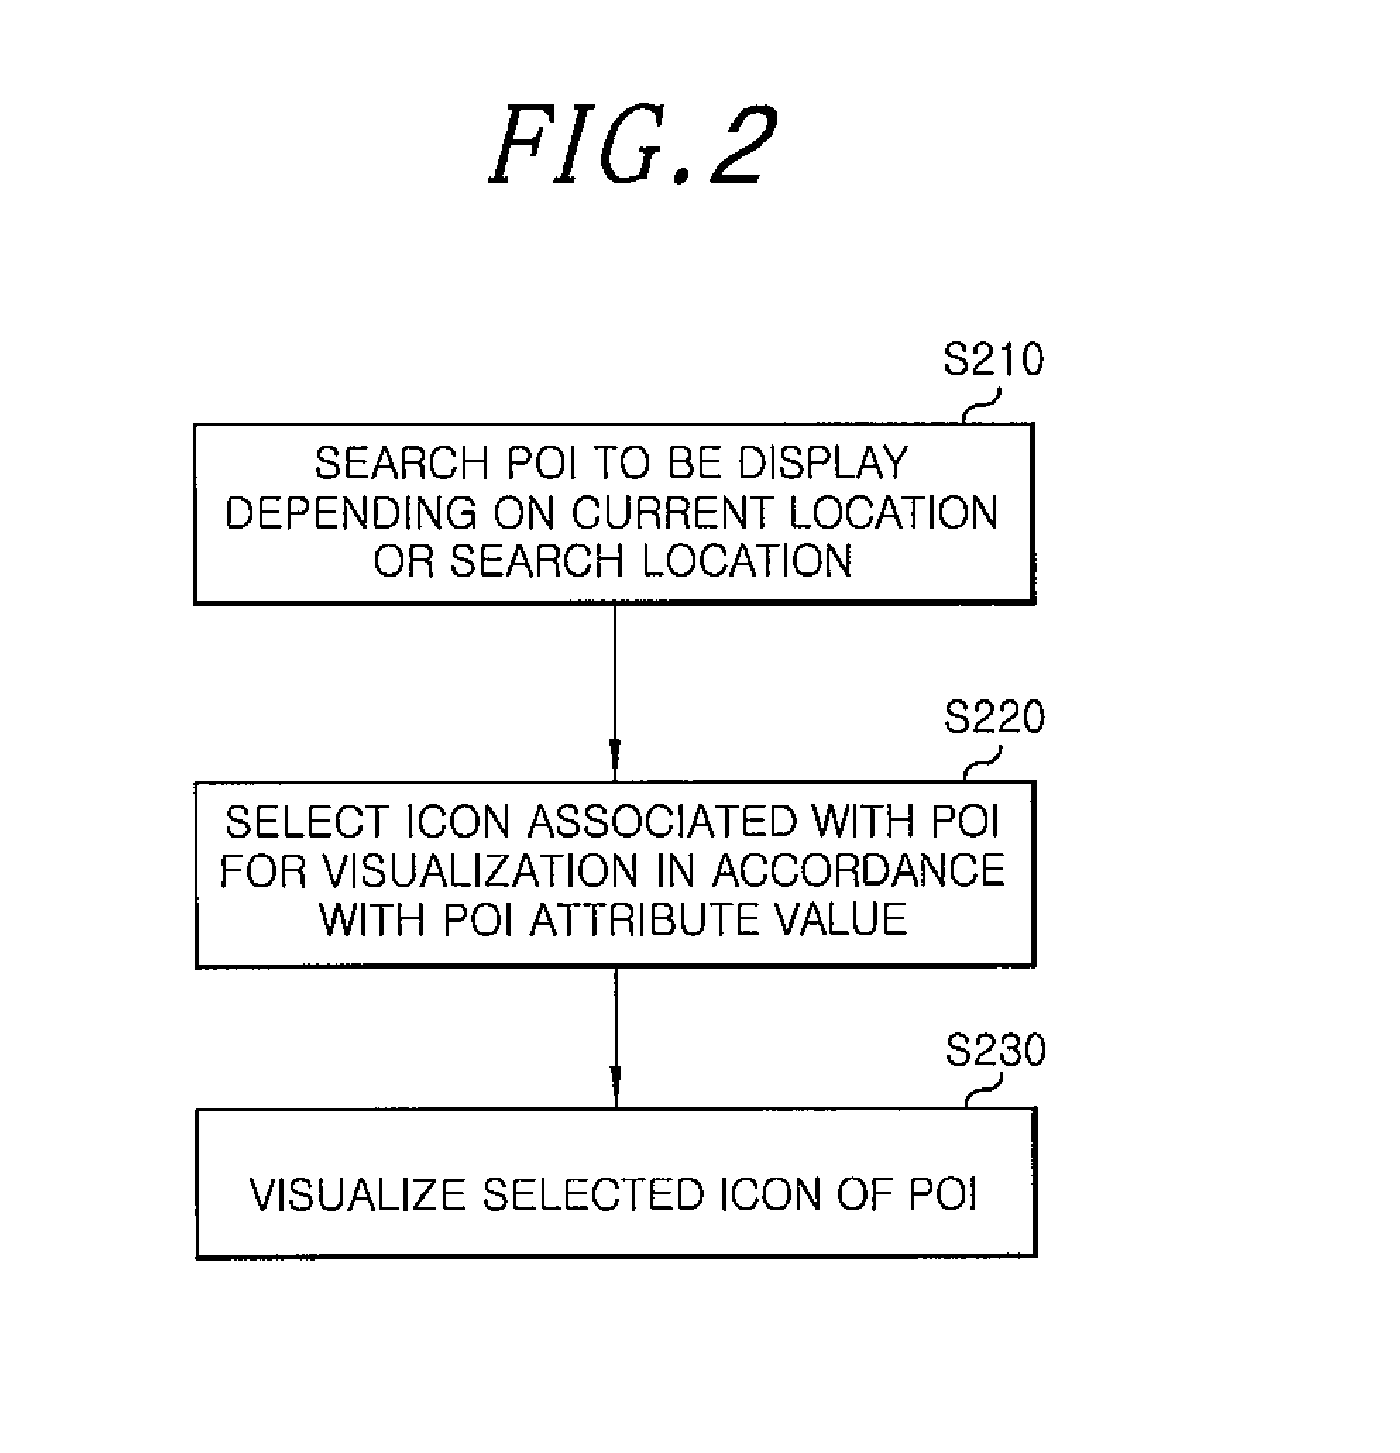 System and method for dynamic visualization of poi attributes and method for refreshing poi attributes